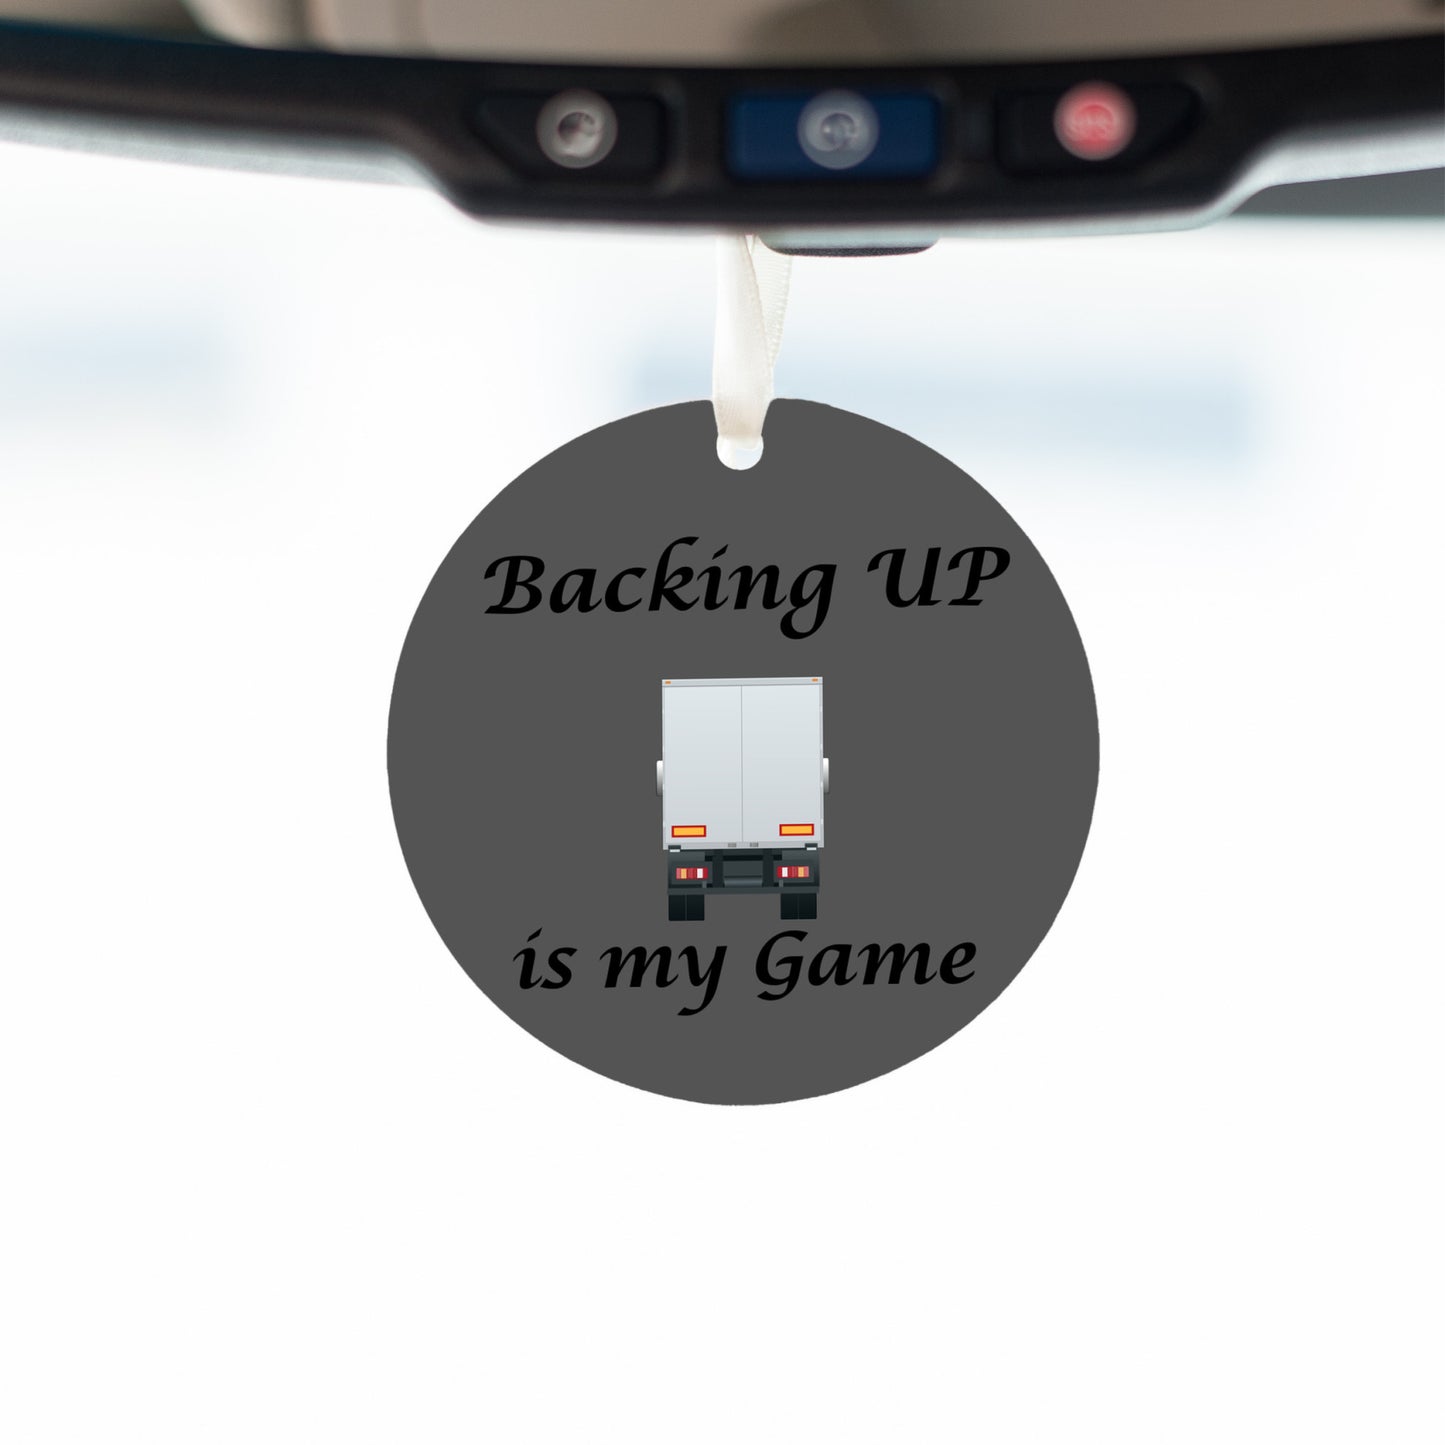 Backing up is my game - truck driver ornament